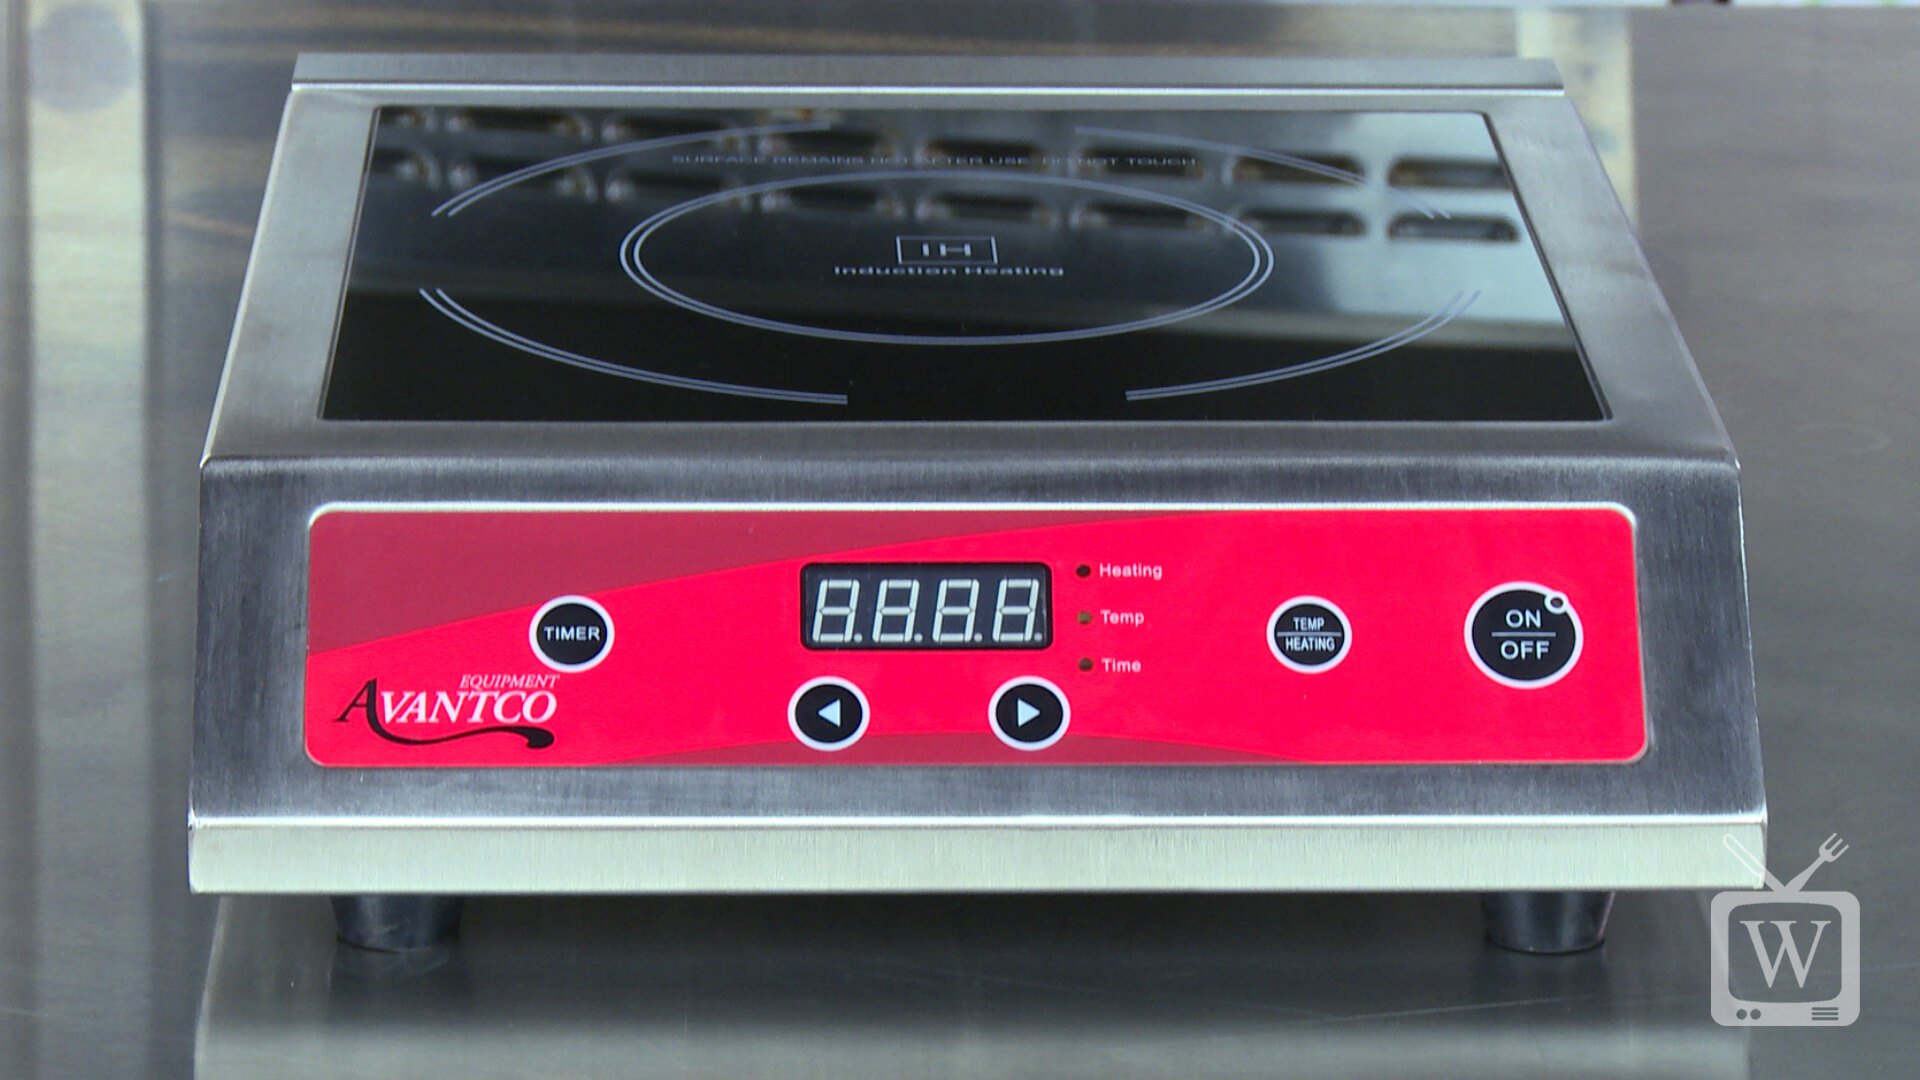 What are the advantages of using an induction range?